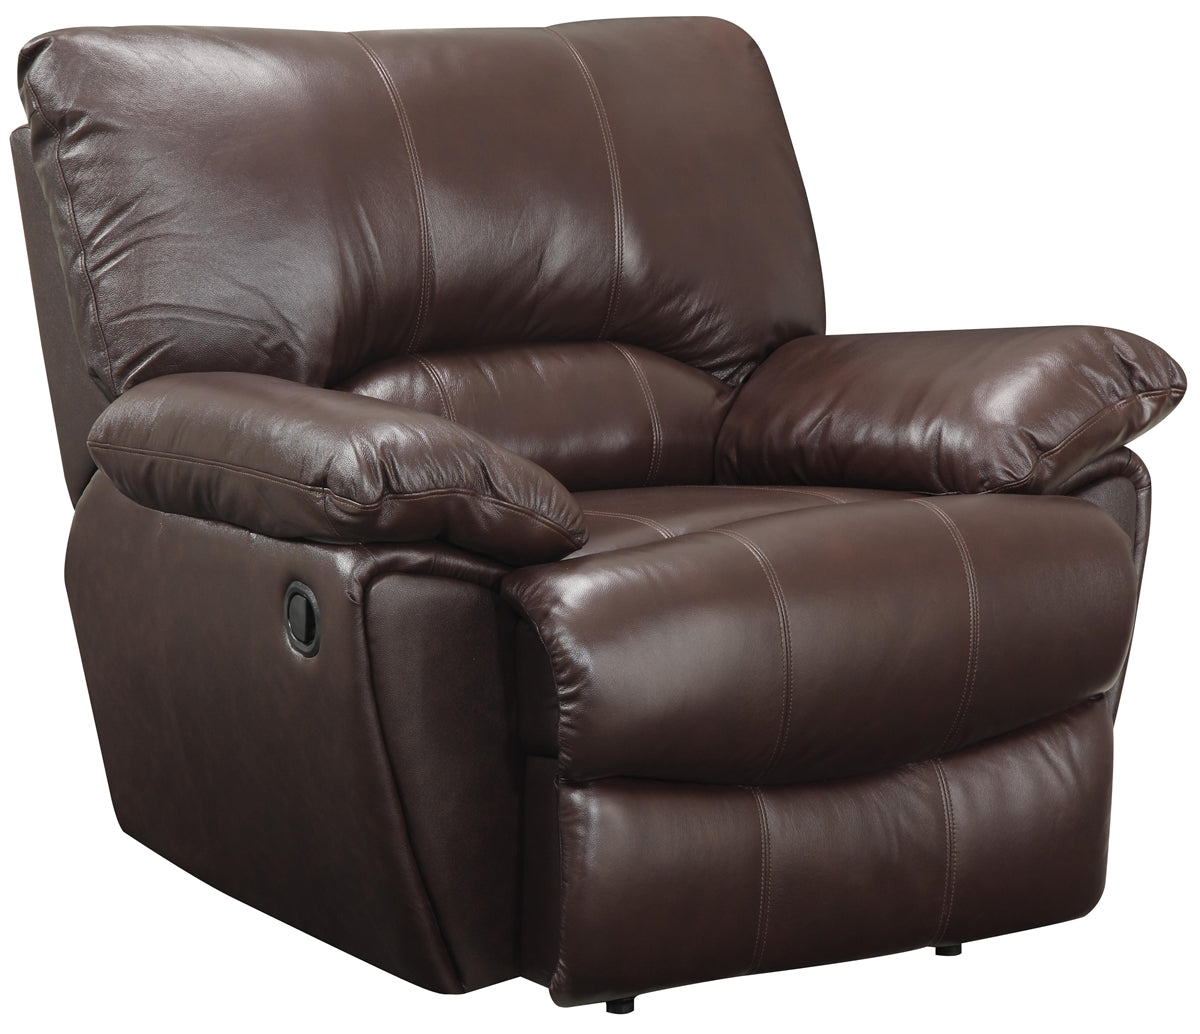 Ford Top Grain Leather Recliner